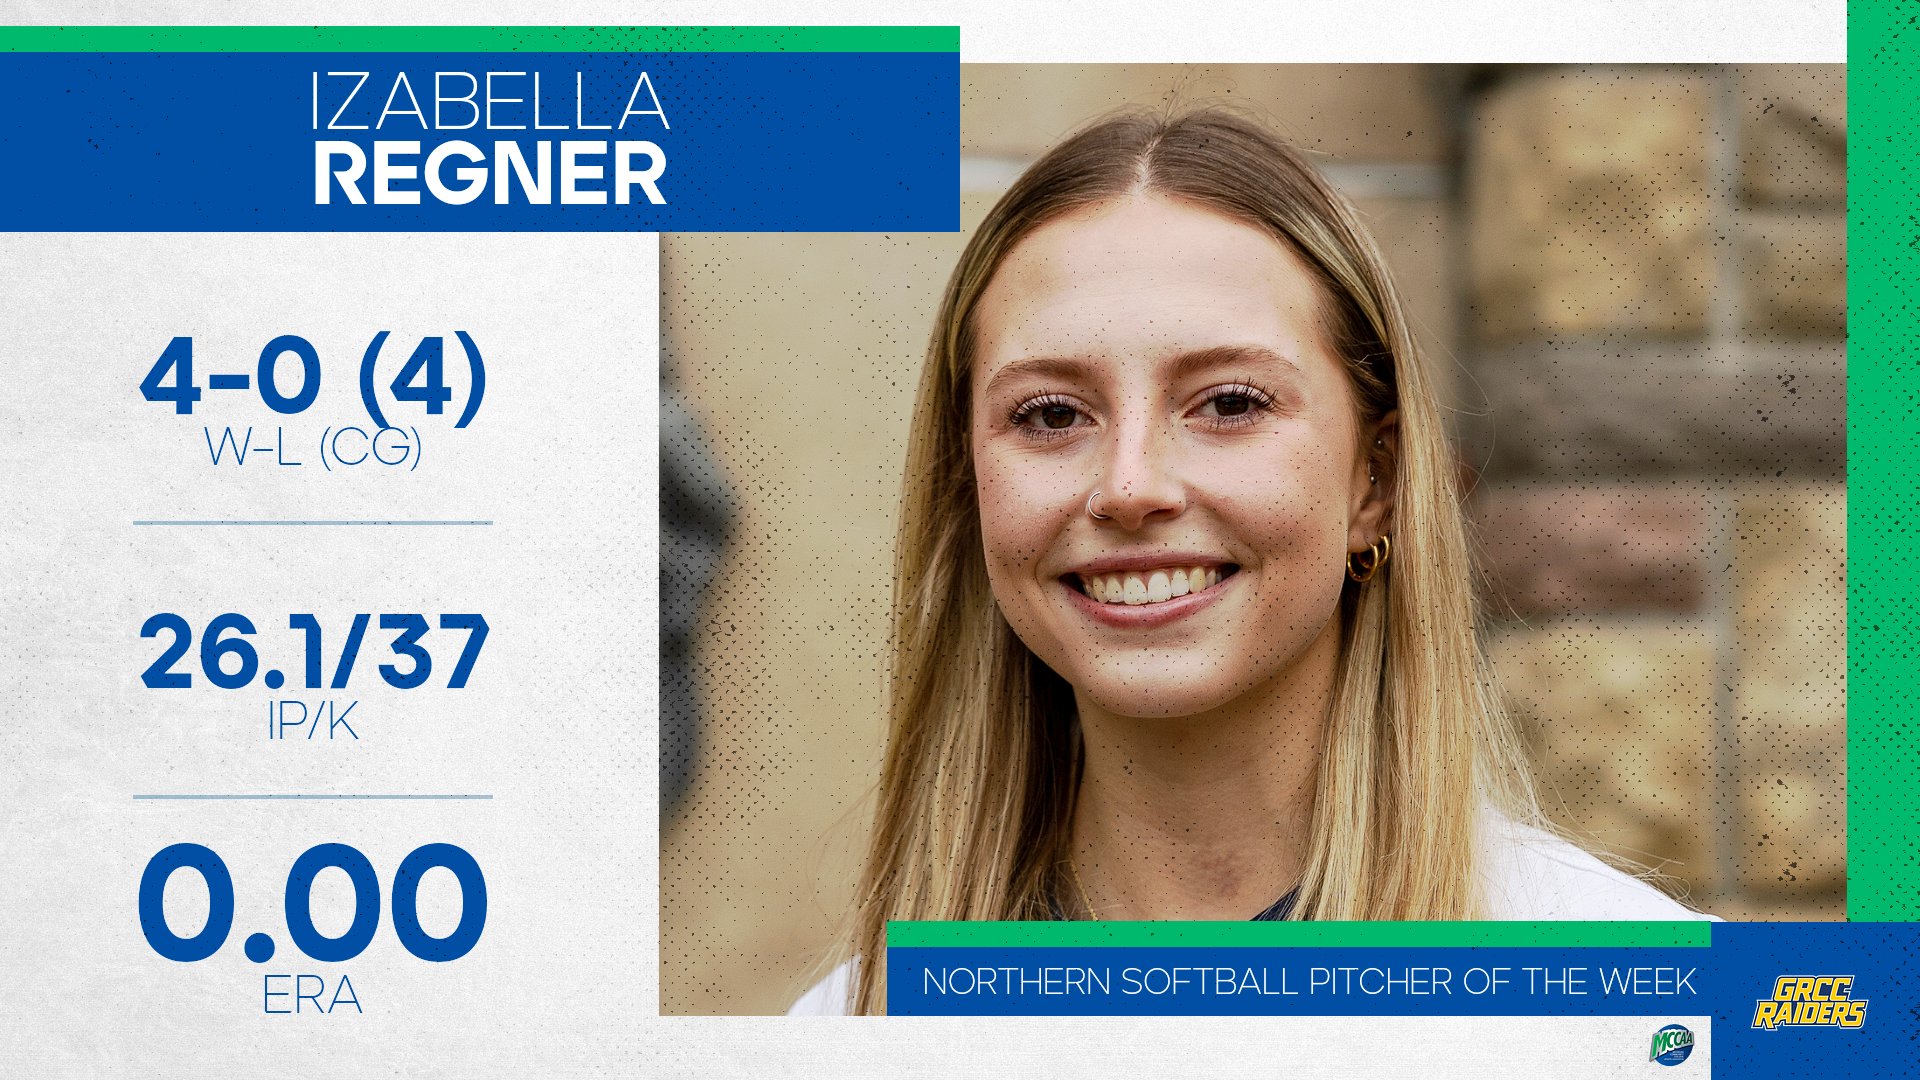 Isabella Regner, MCCAA Northern Conference Softball Pitcher of the Week, Grand Rapids CC